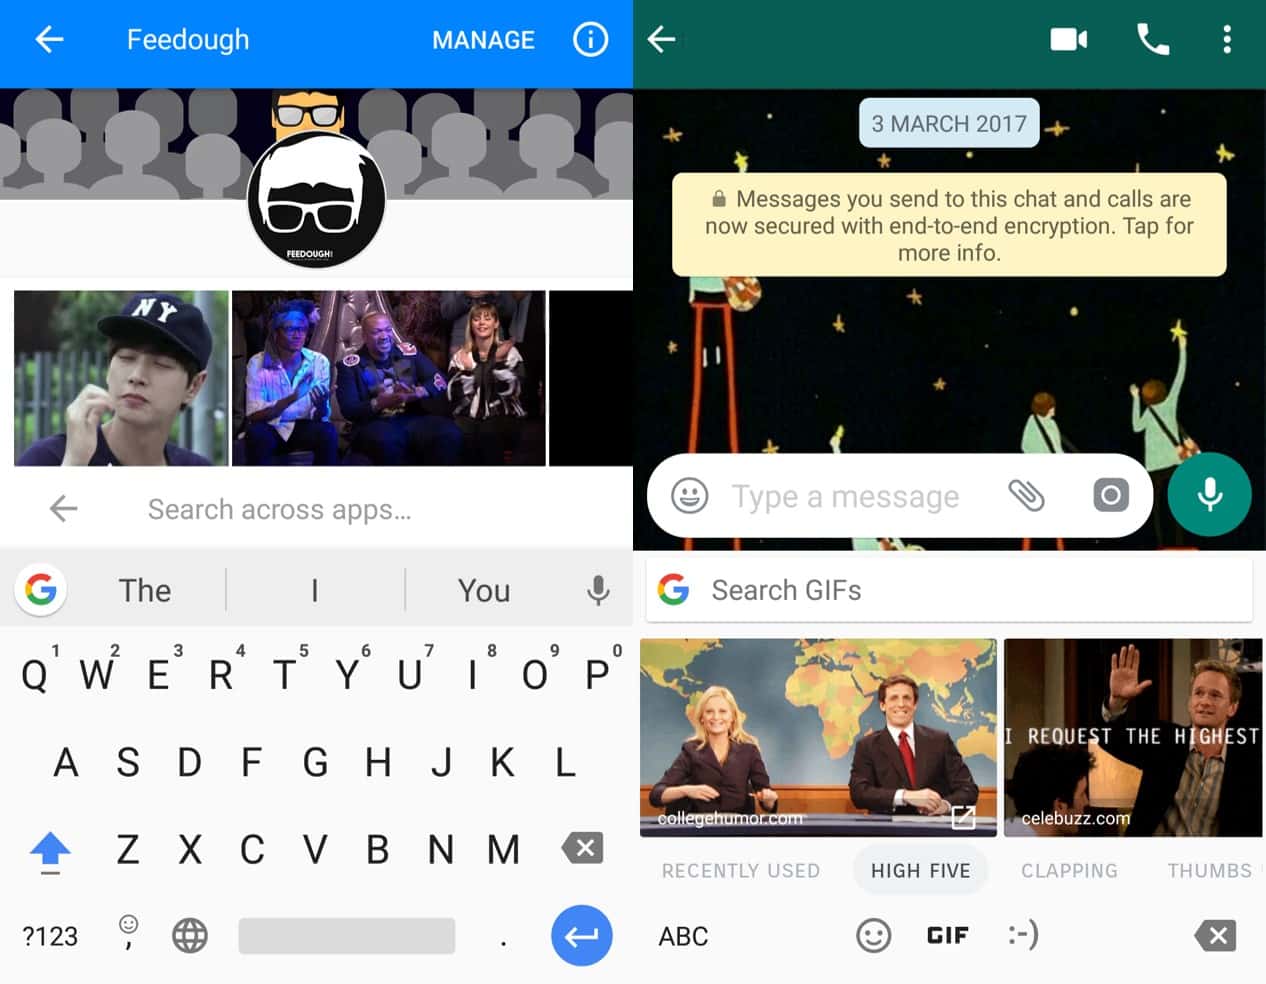 giphy integration with facebook and whatsapp